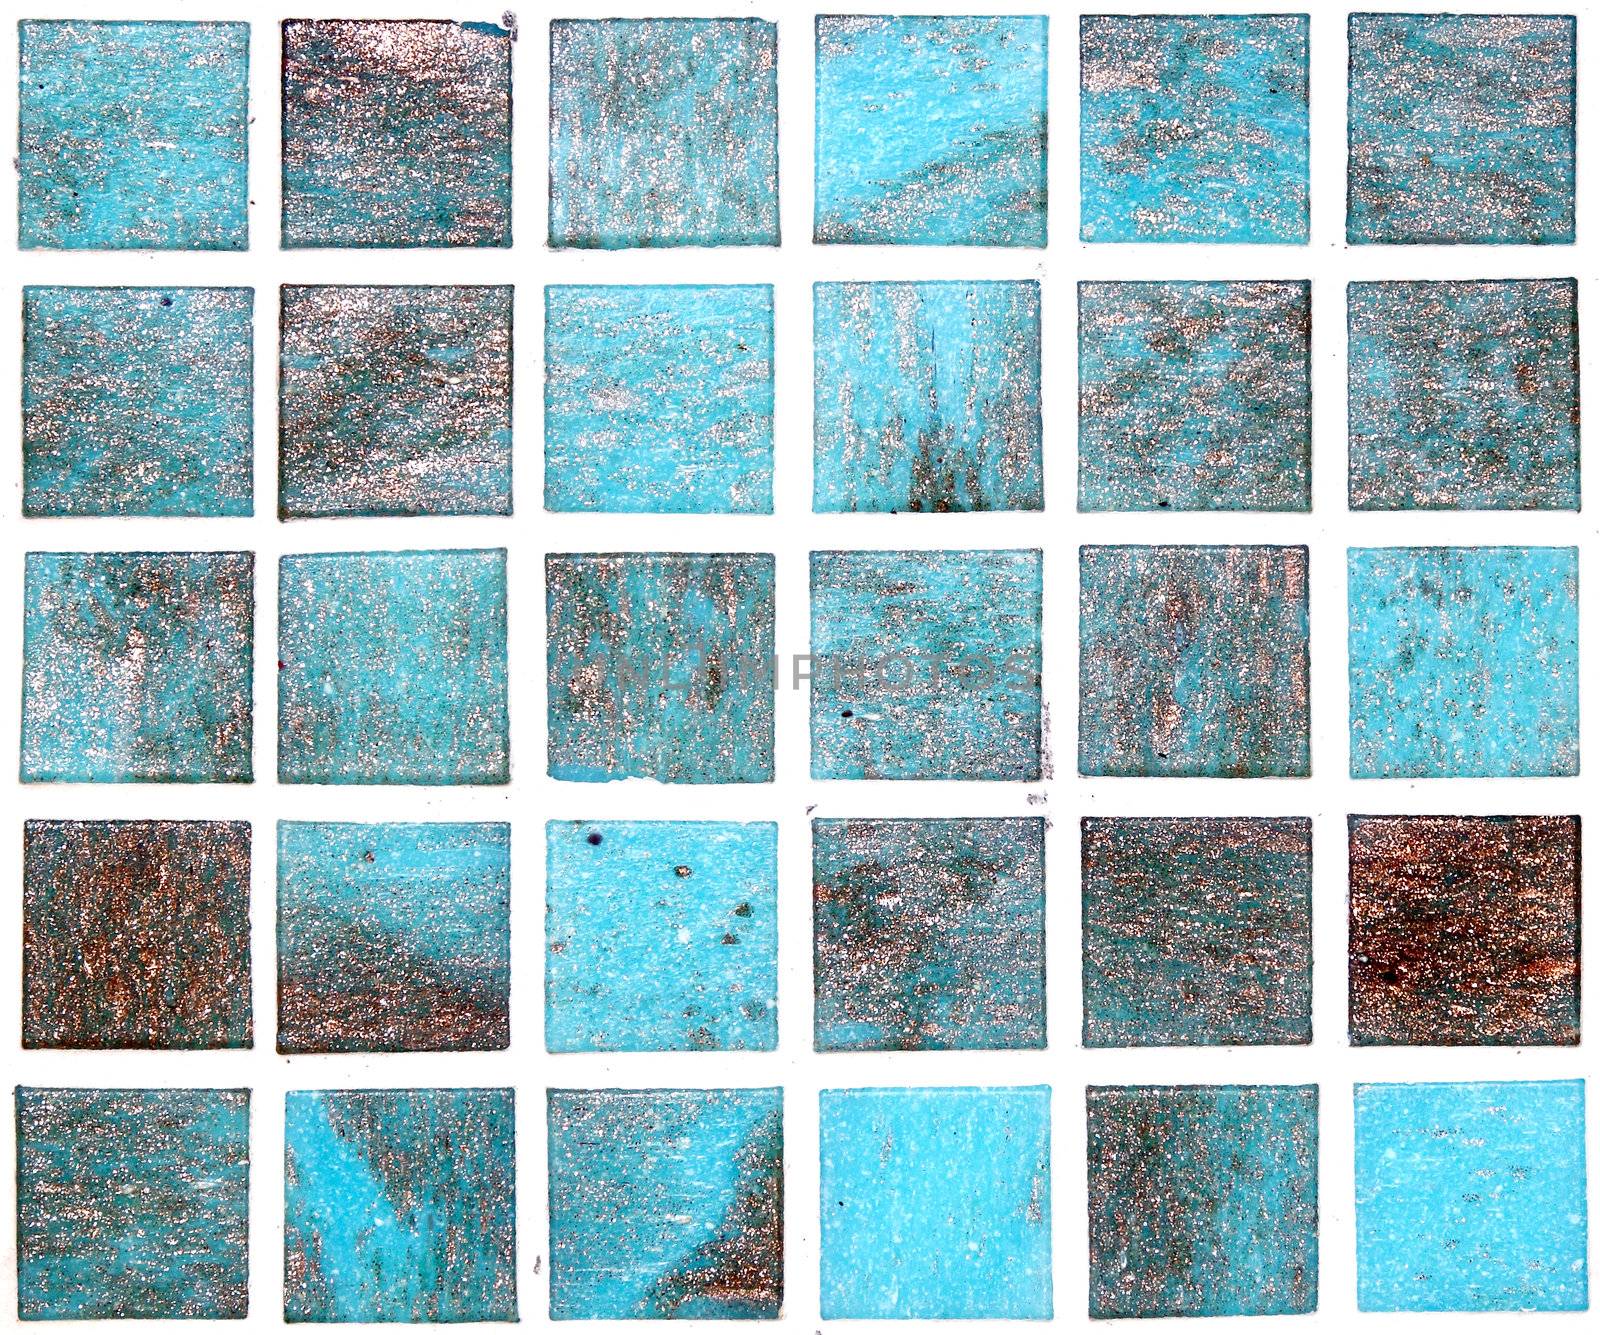 tile texture background of bathroom or swimming pool tiles on wall